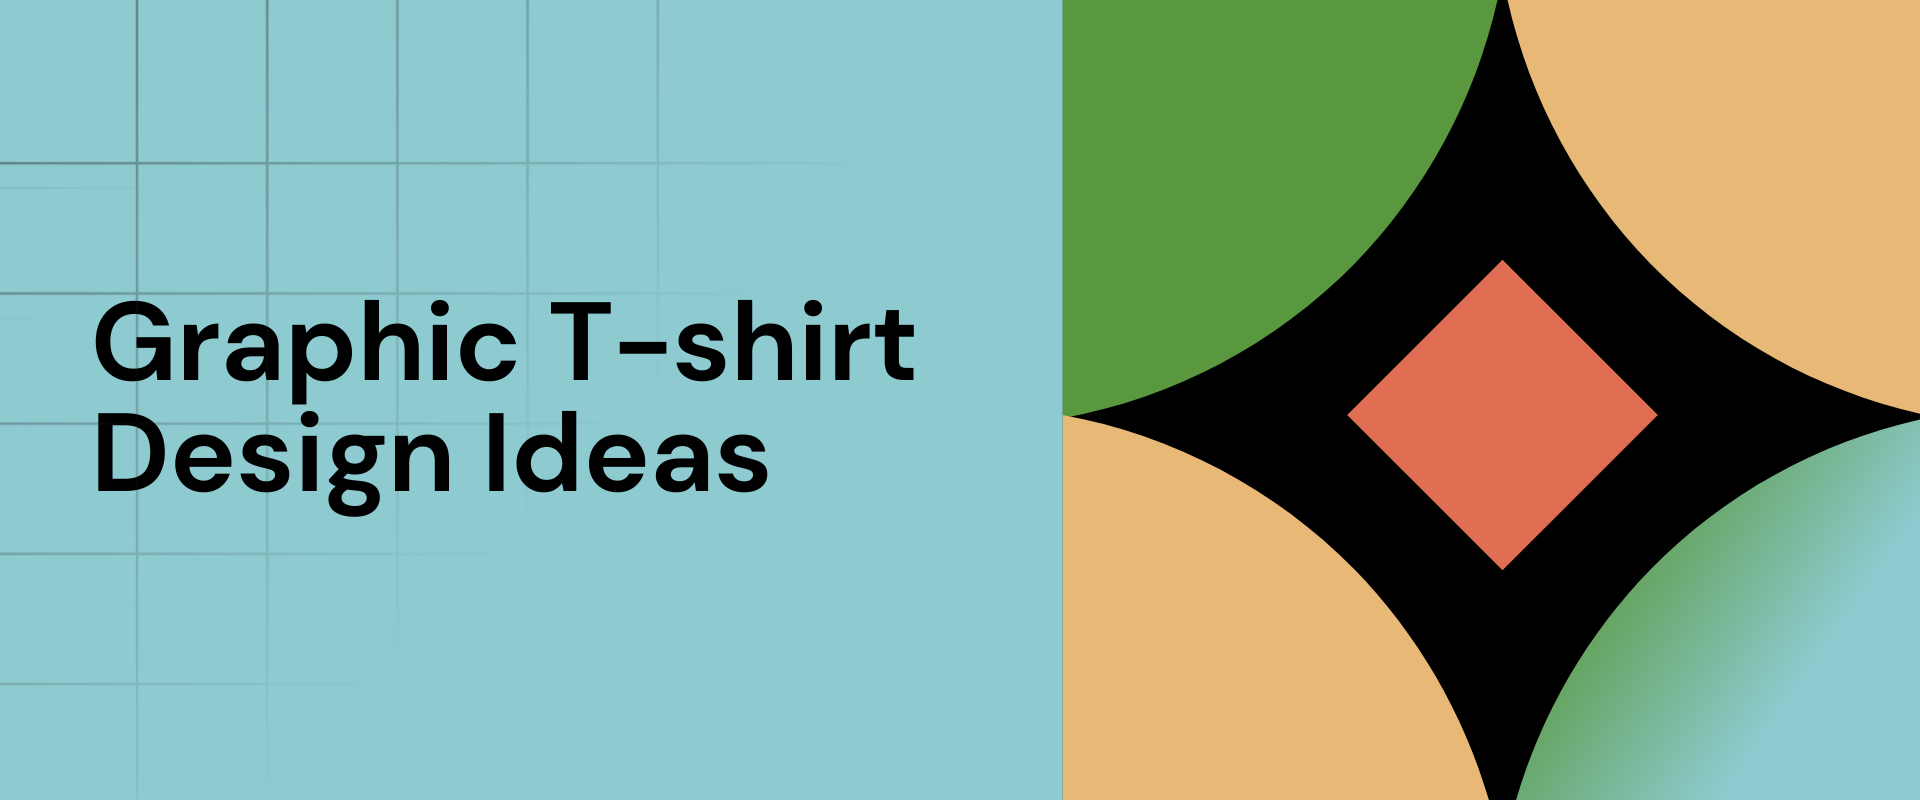 Ultimate Graphic T-shirt Design Ideas to Stand Out From the Crowd